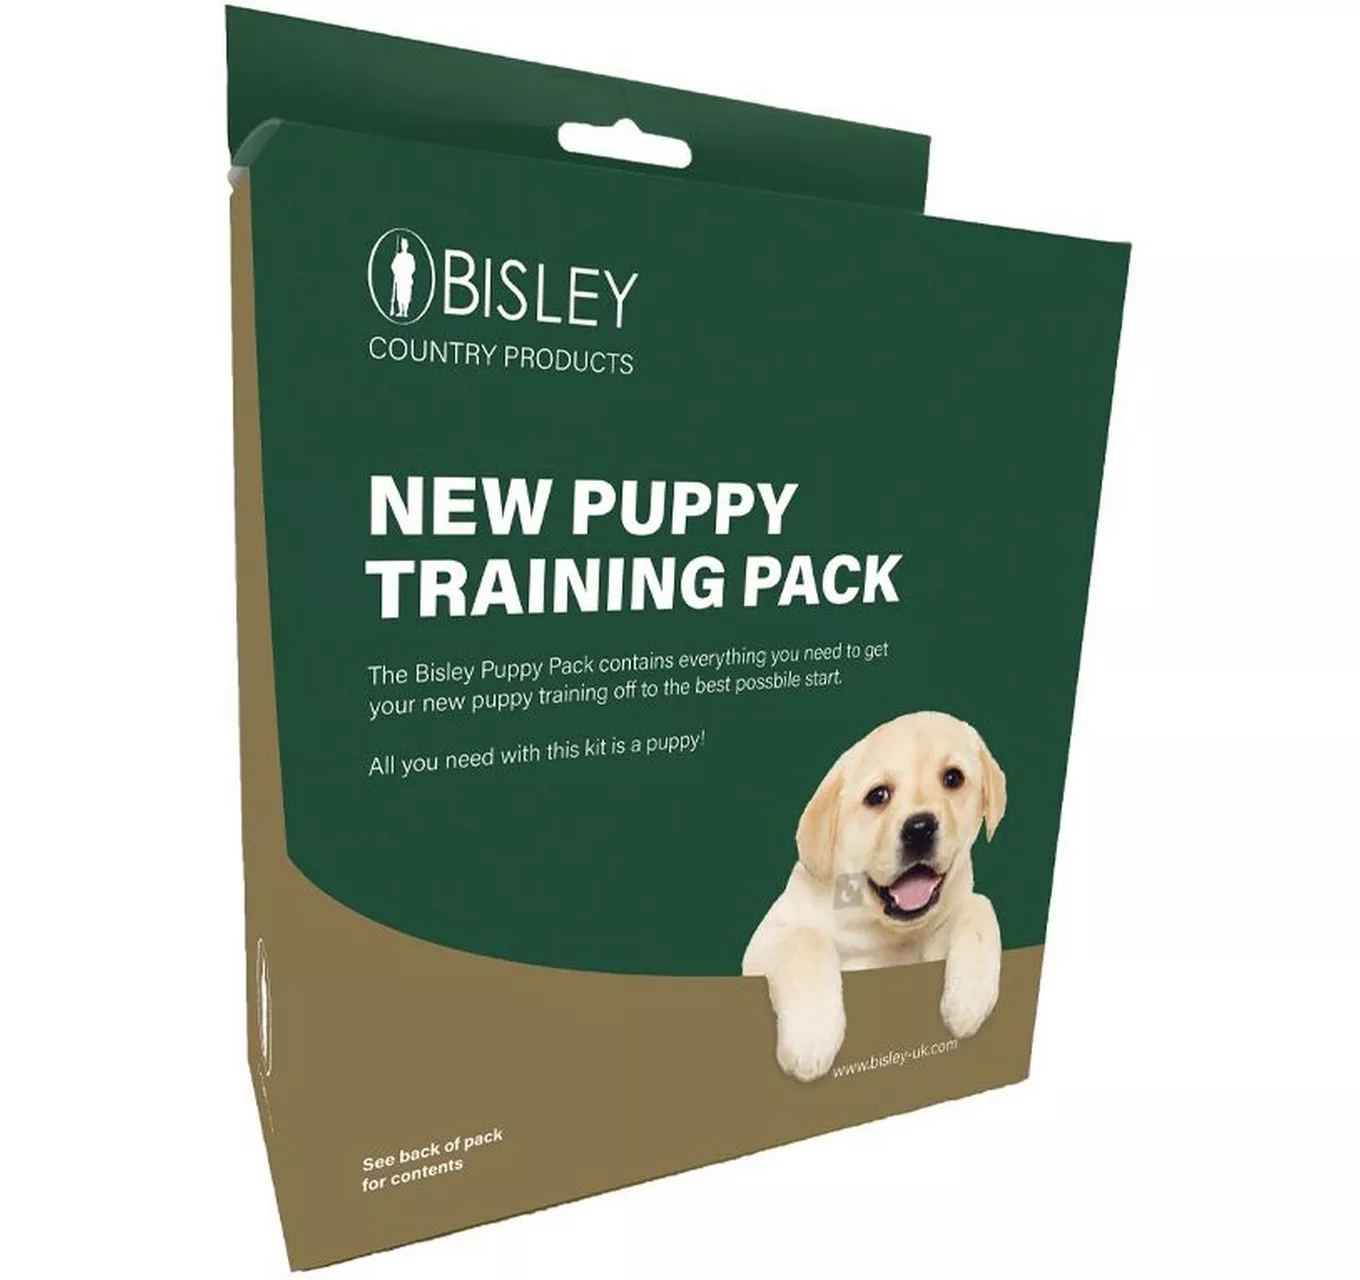 New Puppy Training Pack